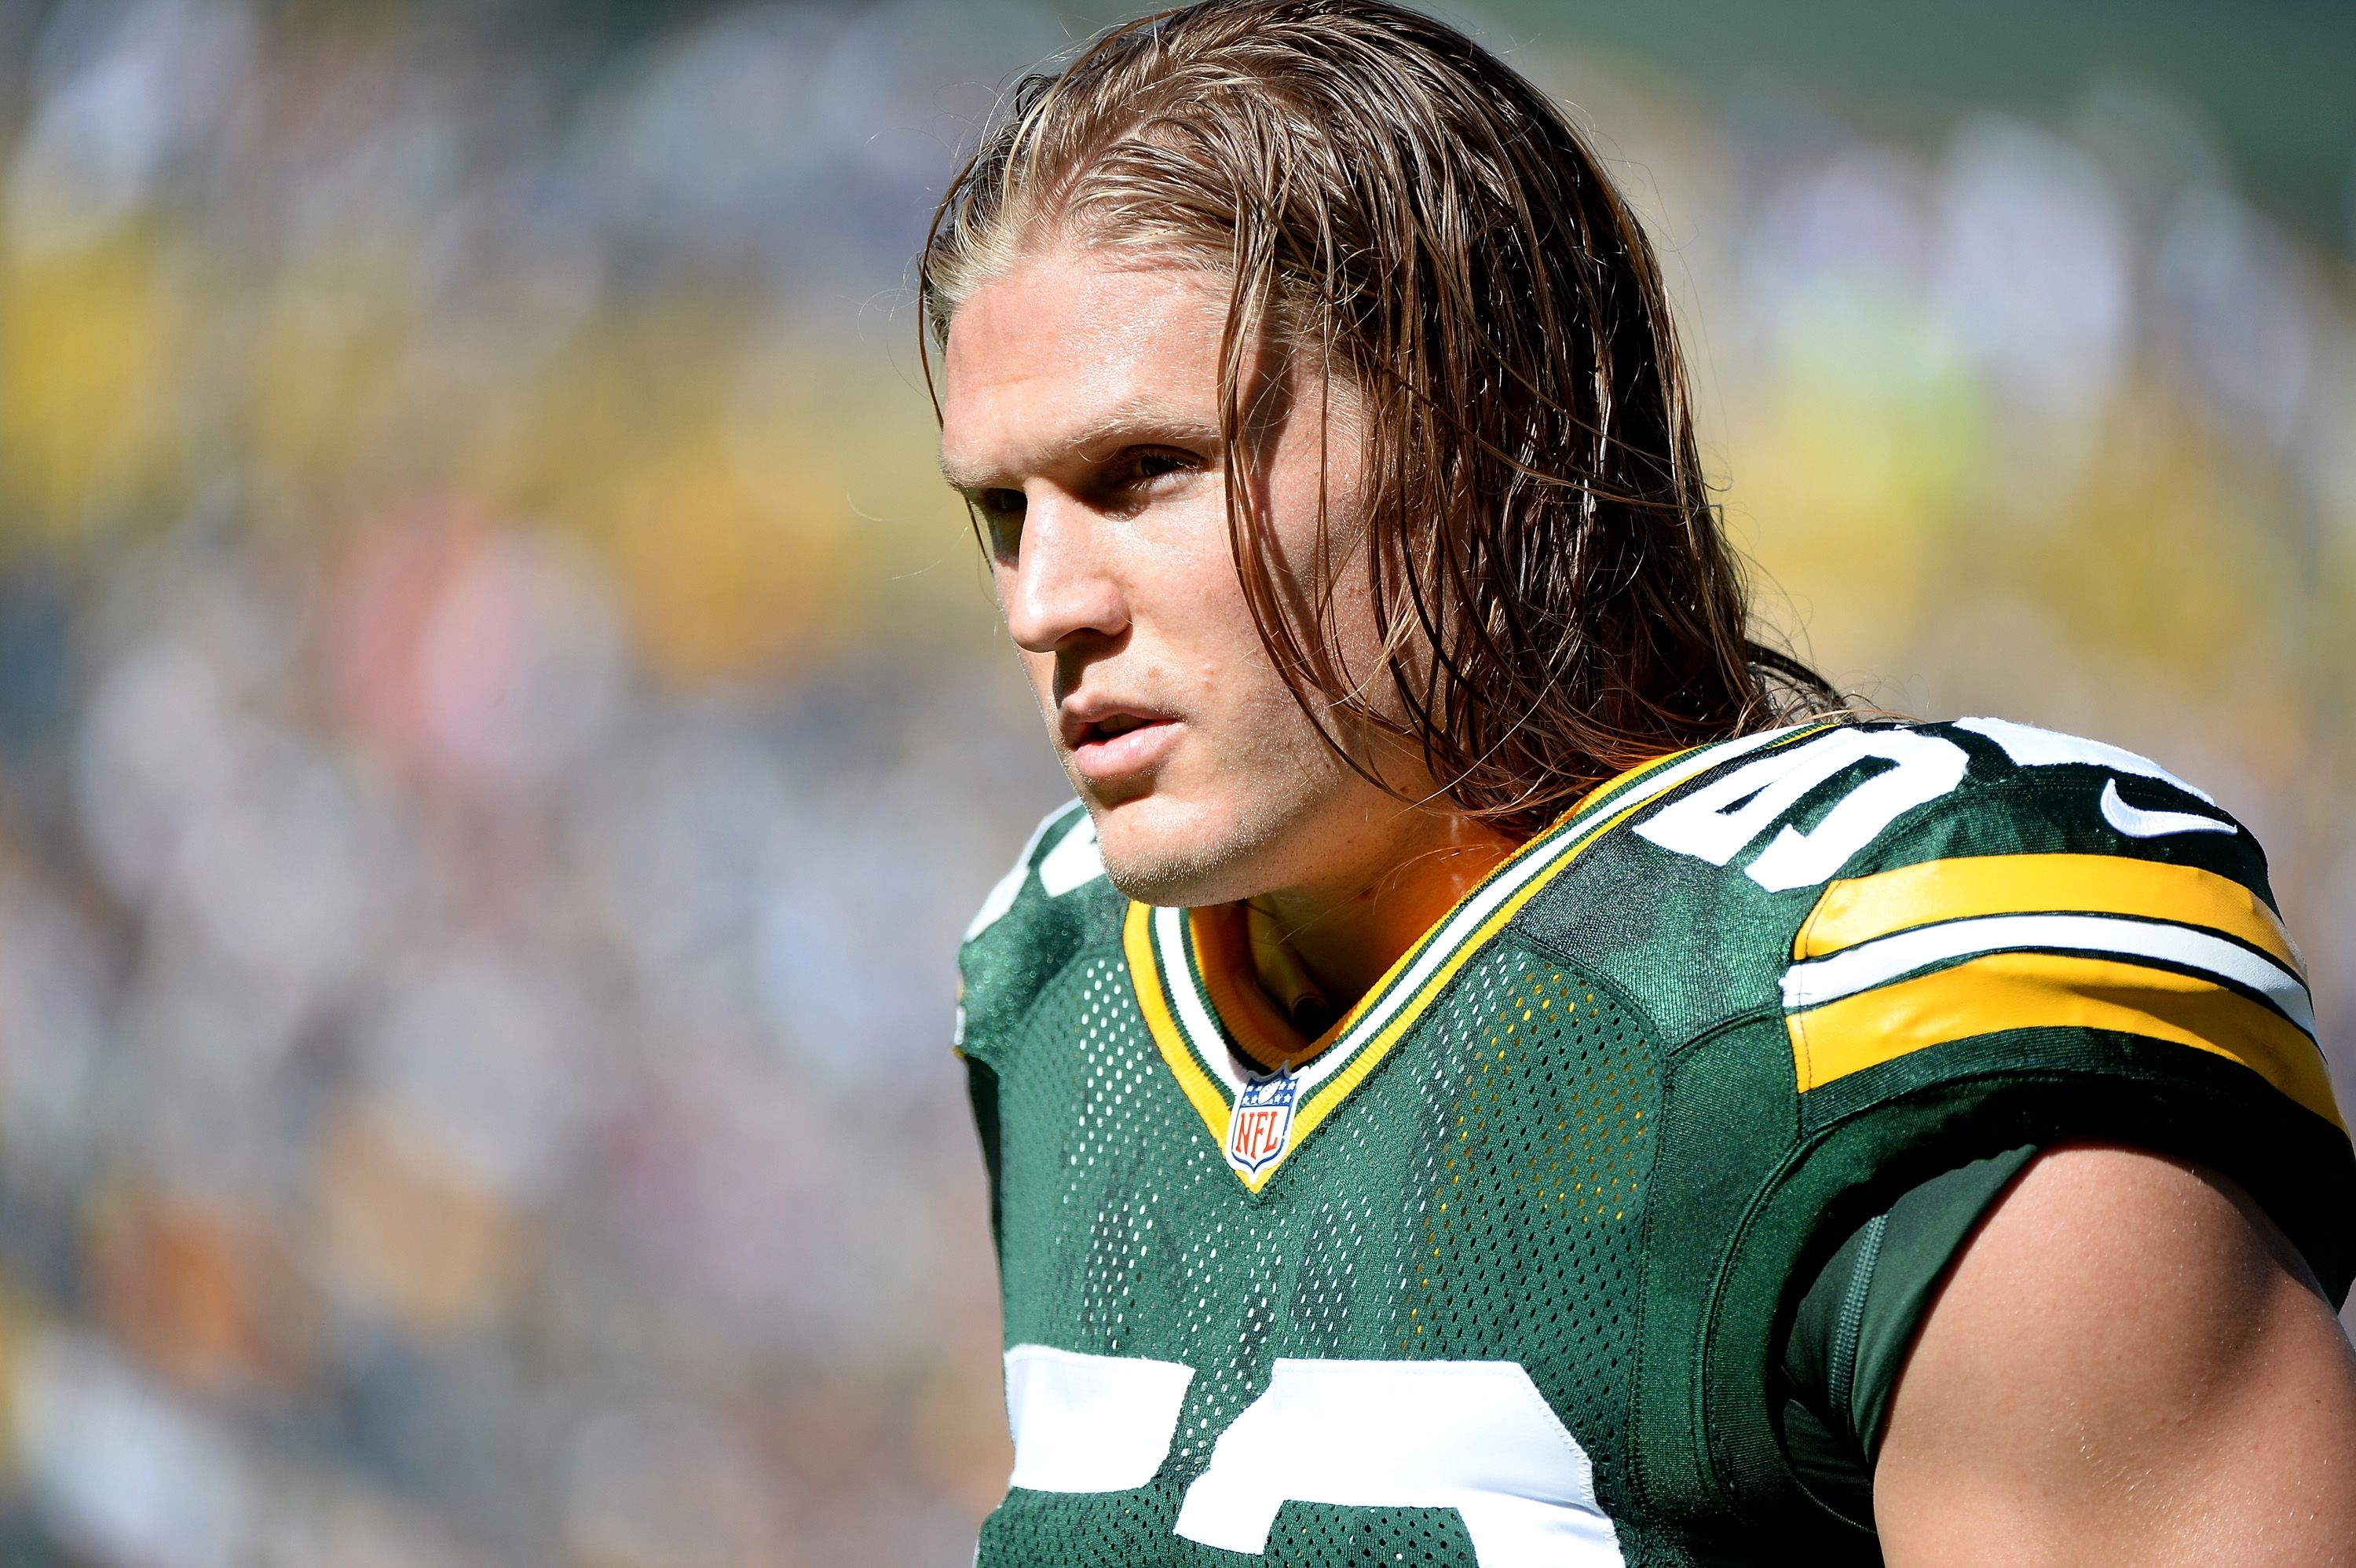 31 Hottest Nfl Football Players Hot Football Players To